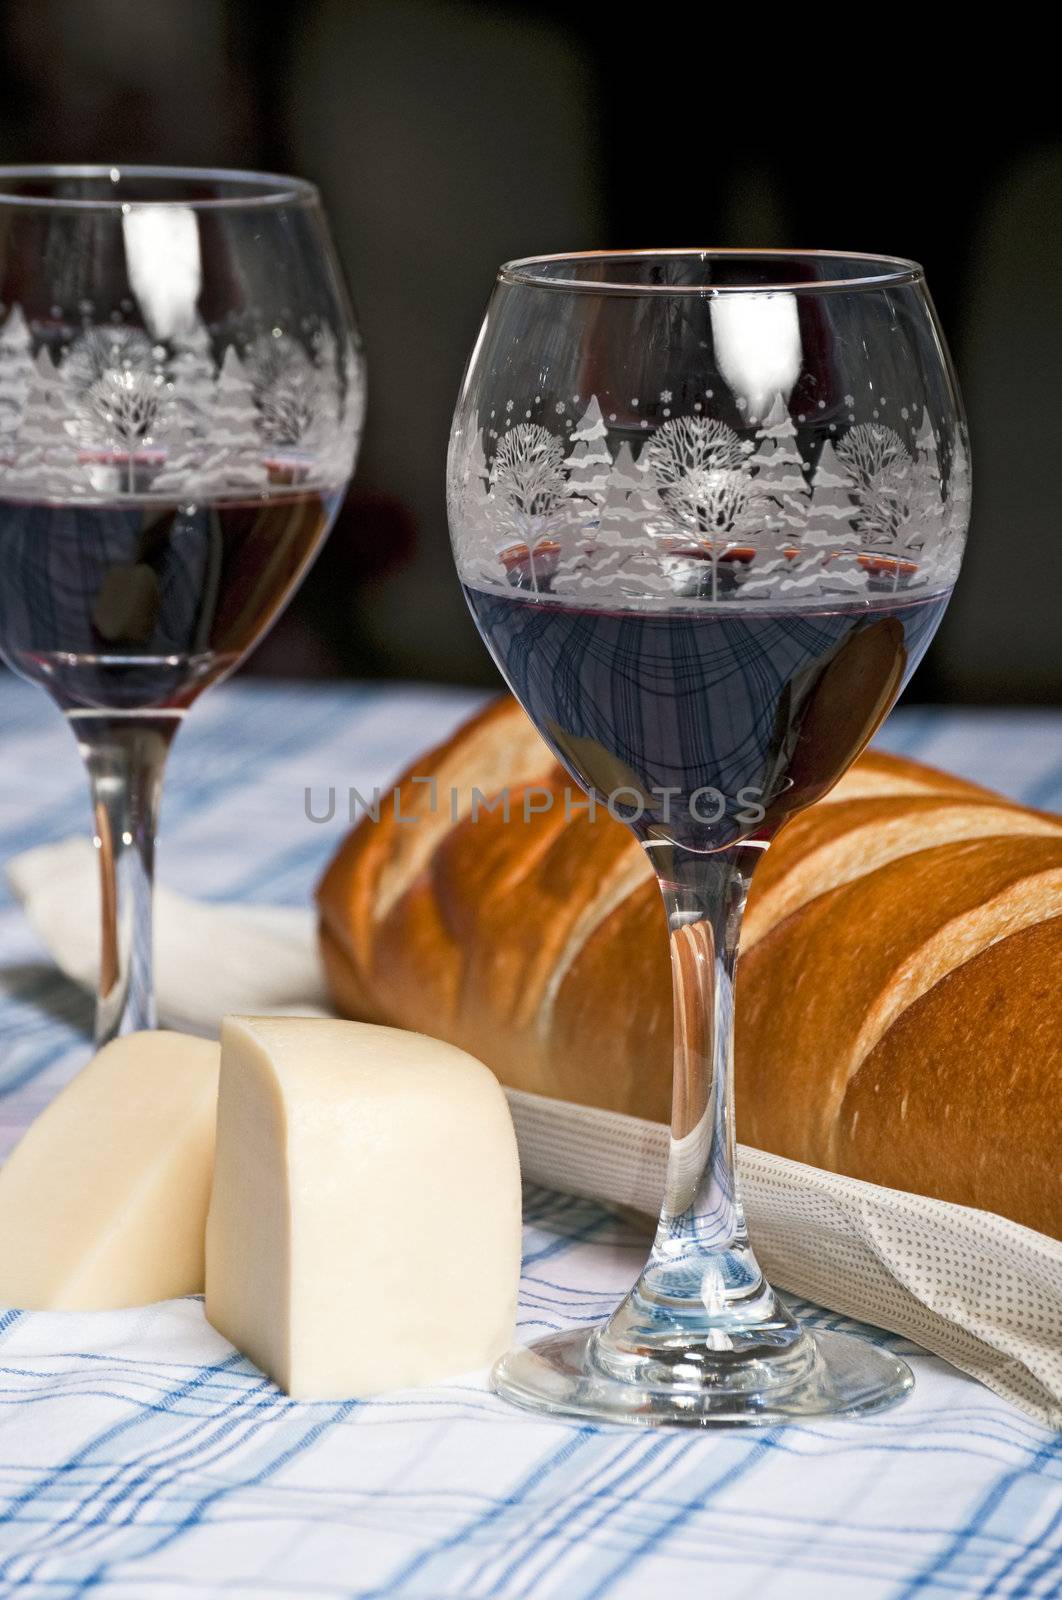 Wine in Holiday glasses with French bread and cheese to celebrate Christmas